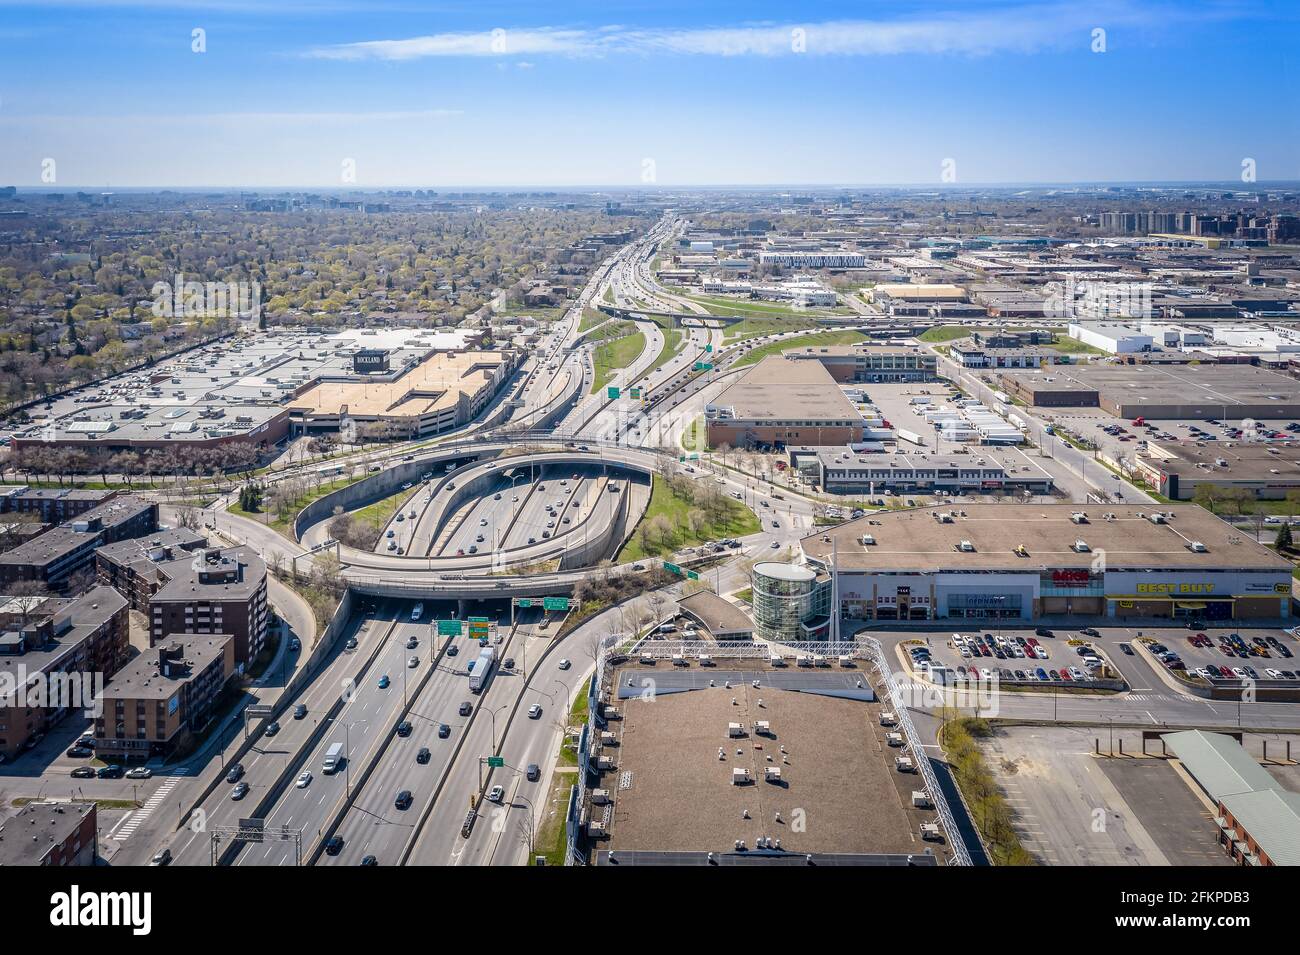 interchange between 15 and 40 in Montreal, aerial view Stock Photo